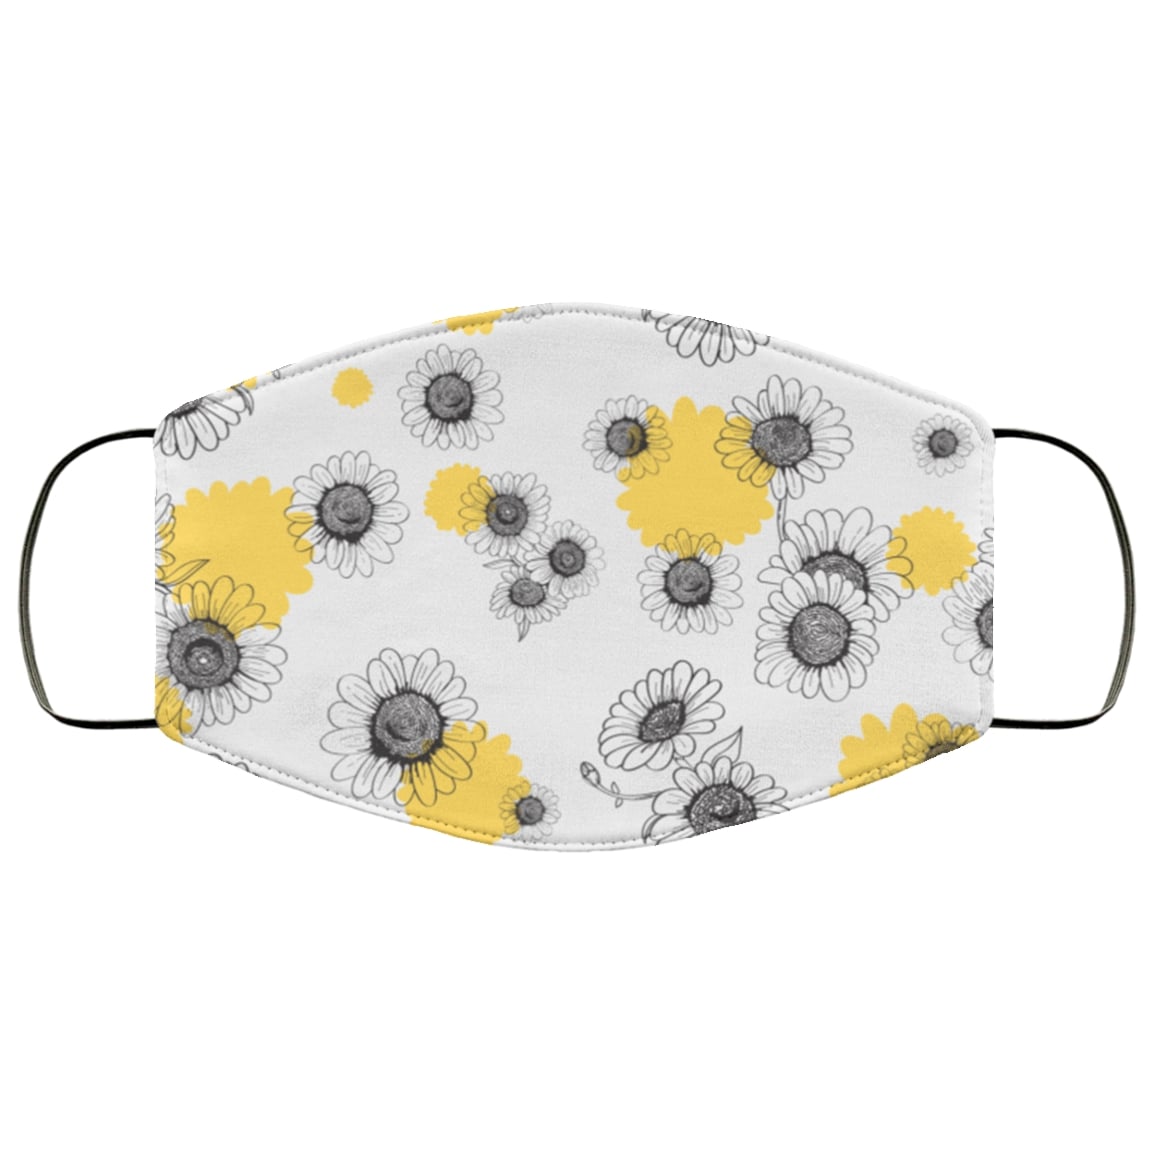 Daisy flower all over printed face mask 1